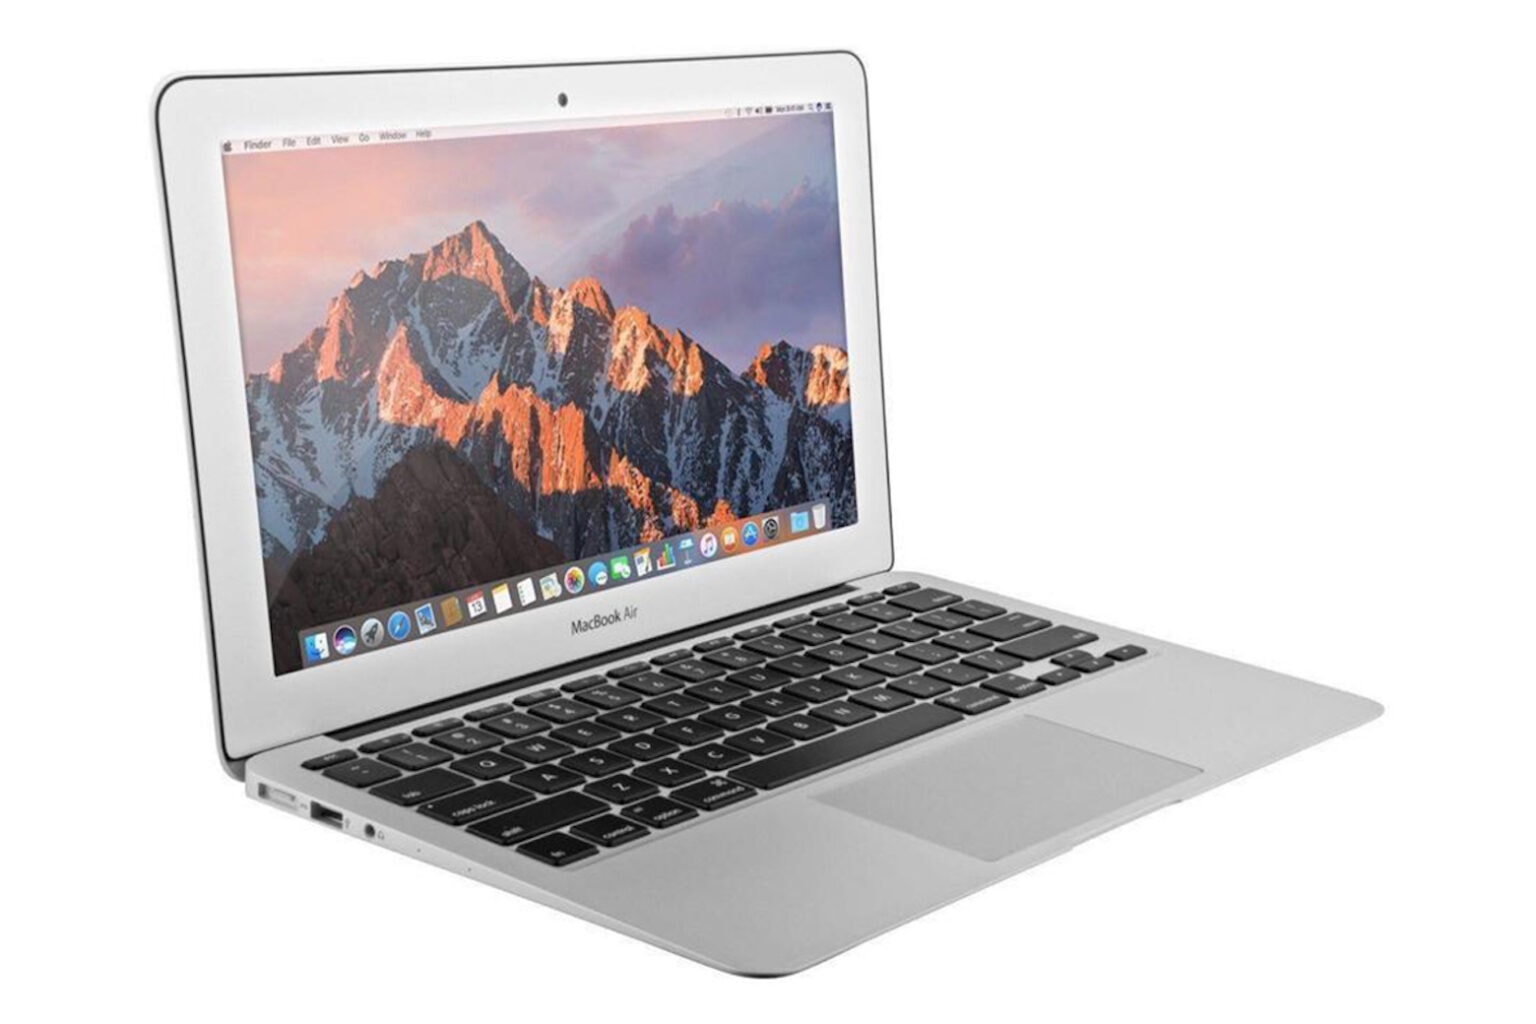 Need a powerful work device? This refurbished MacBook Air with an Intel Core i5 Processor can do it all.